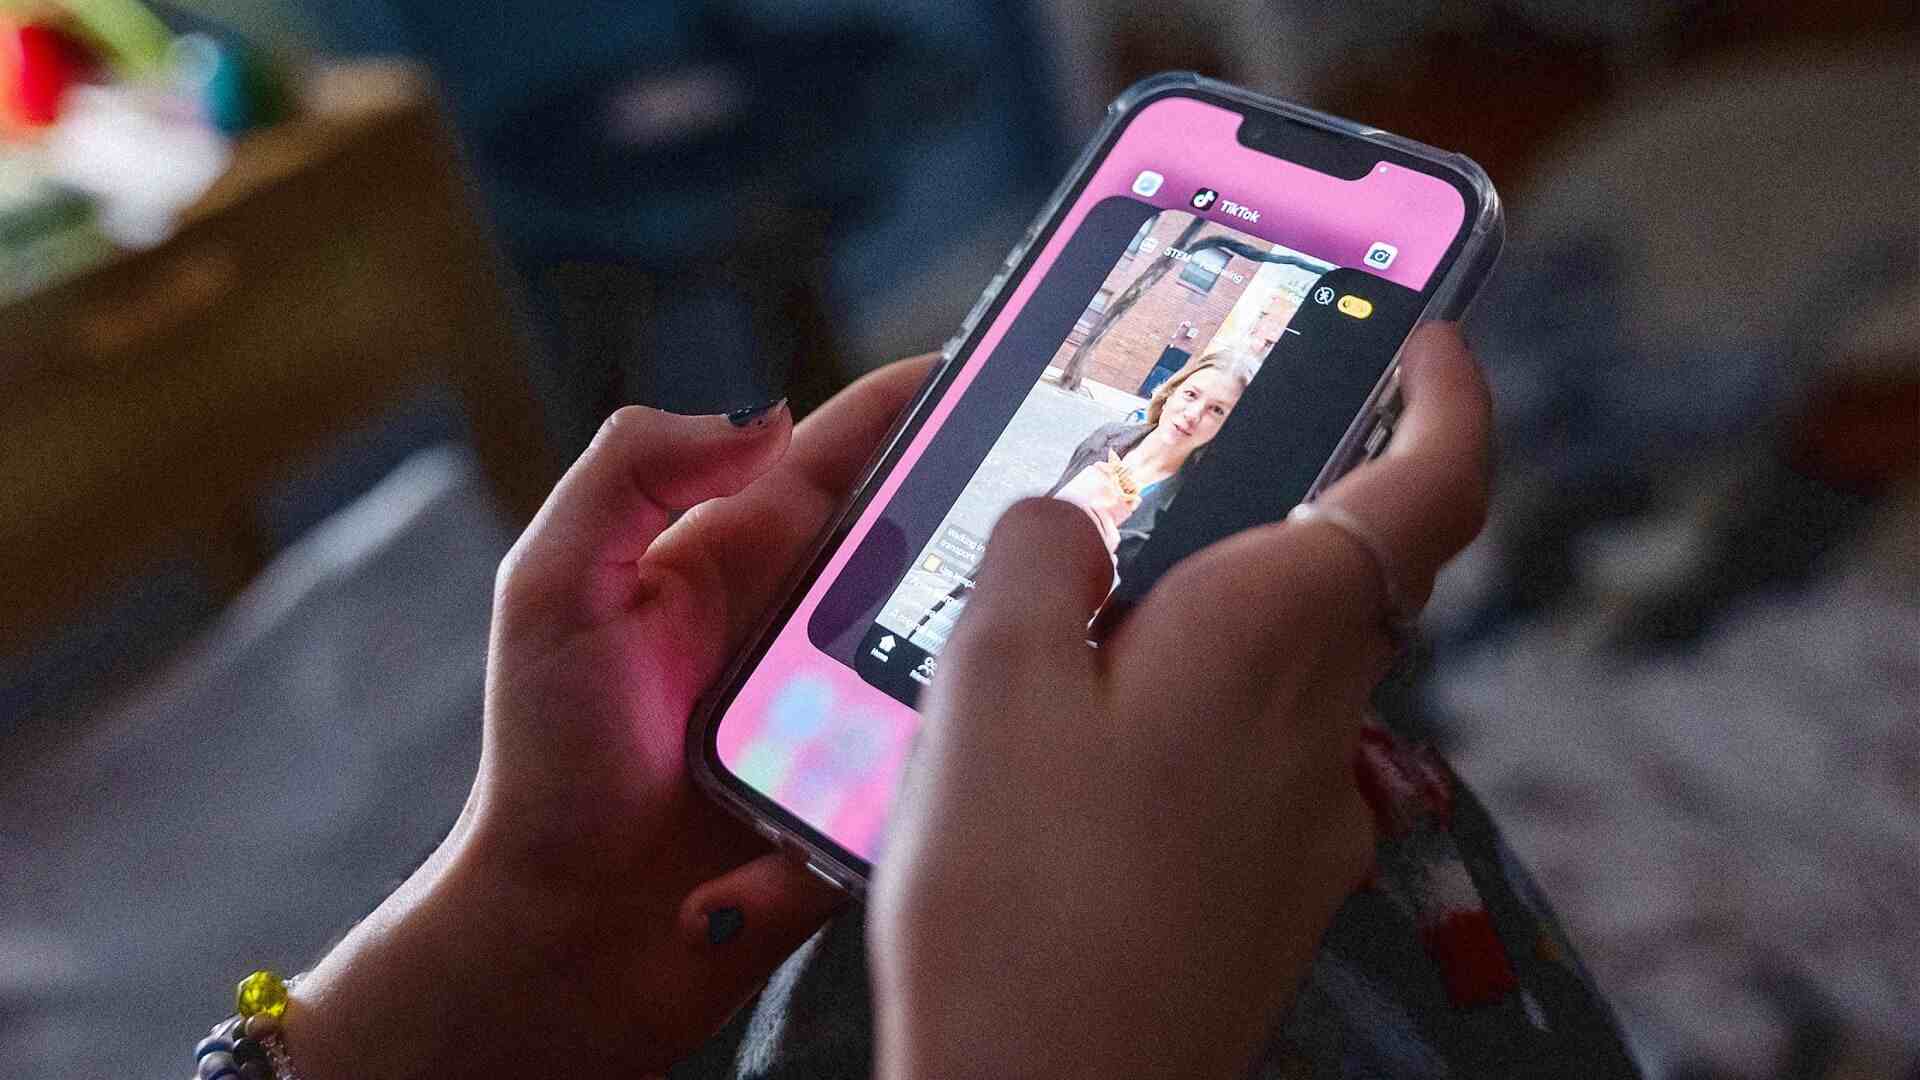 ‘For you’: Teens like how social media algorithms mirror themselves, study finds